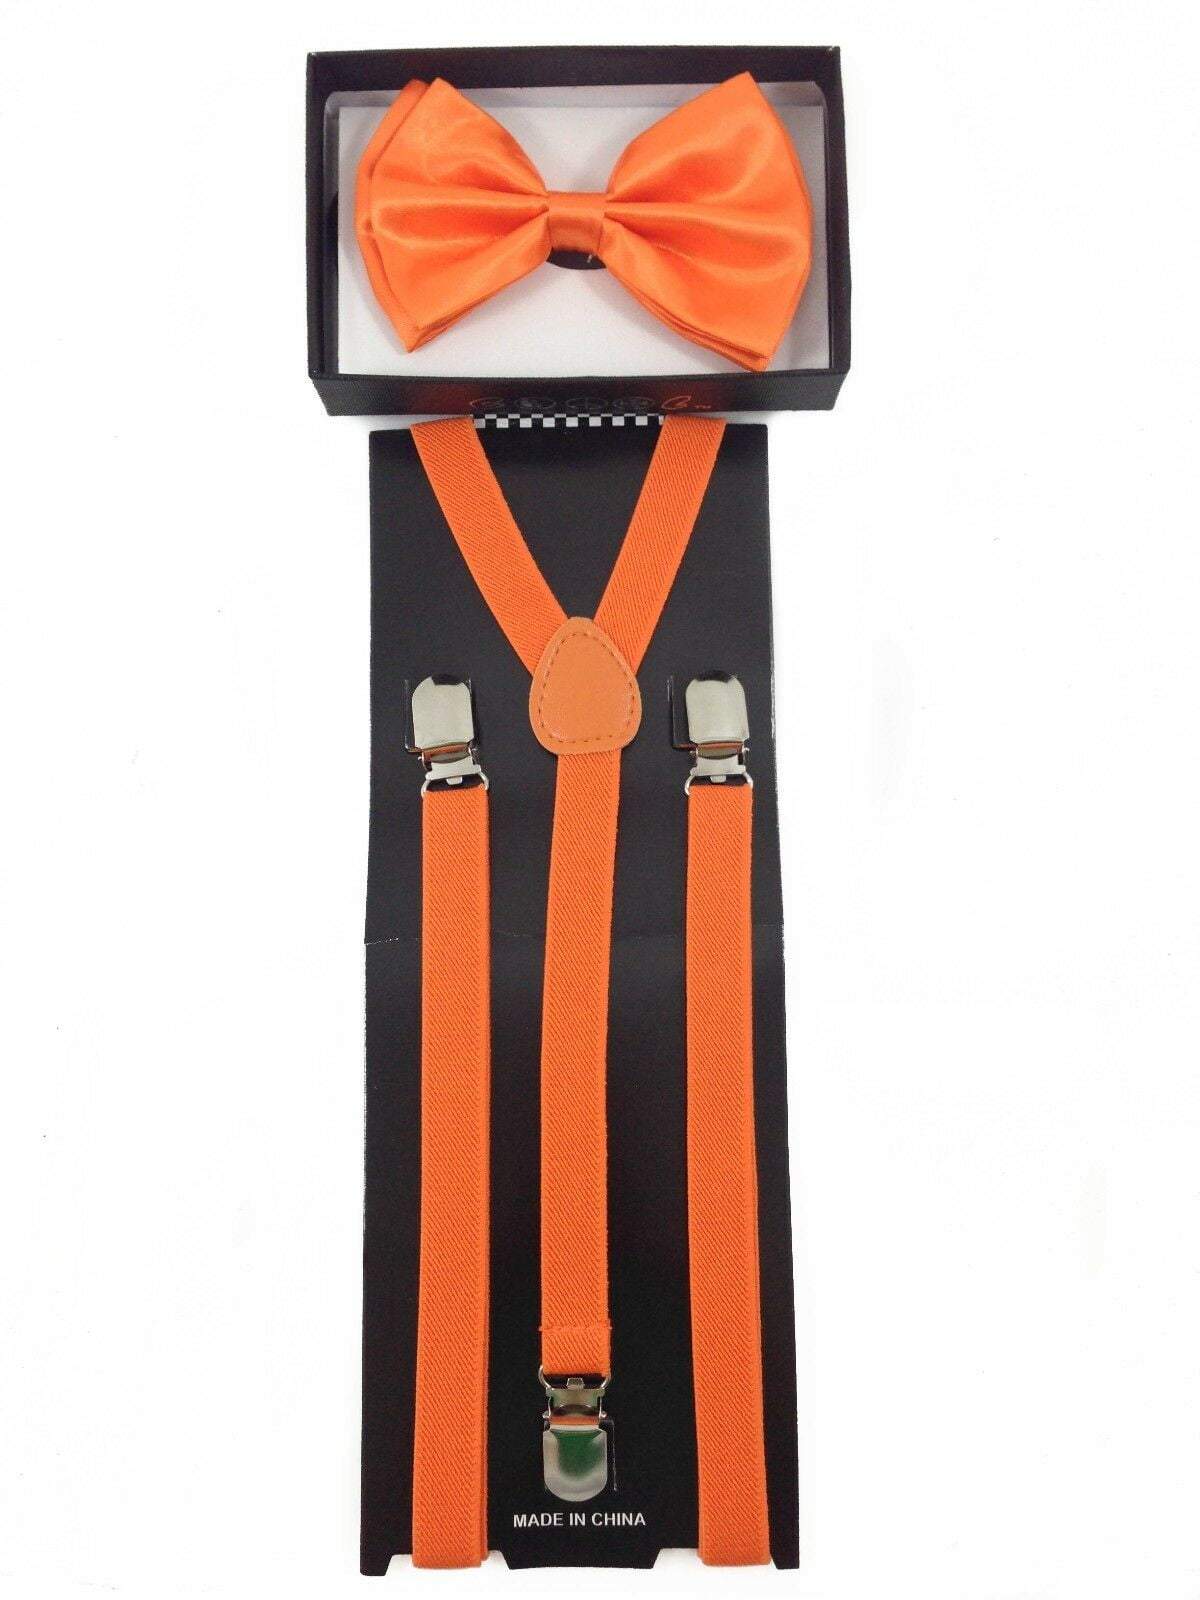 USA SELLER Cream Suspender and Bow Tie Set for Teenagers Adults Men Women 